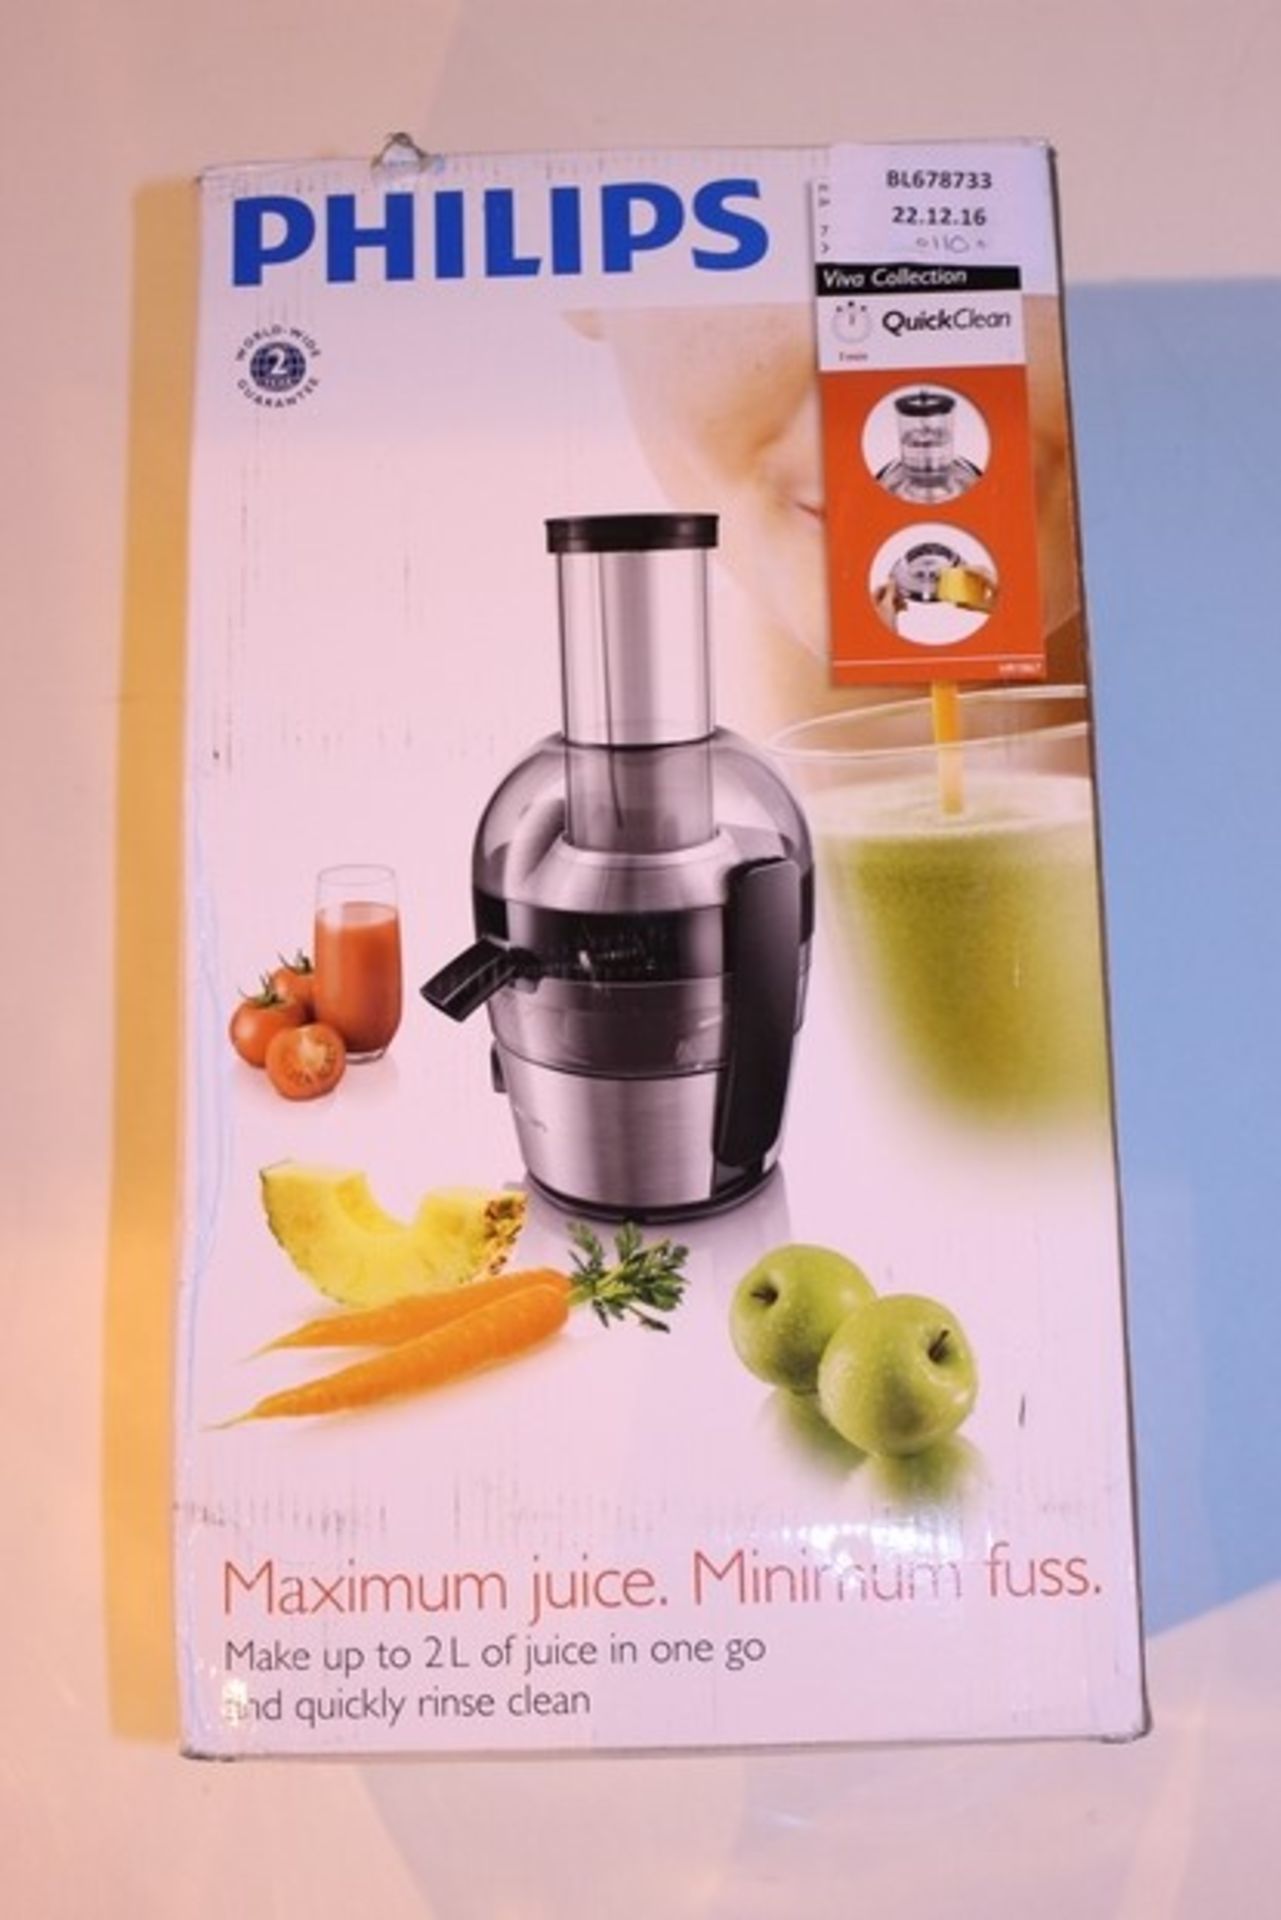 1X BOXED PHILIPS JUICER 700W RRP £100 (BL678733)